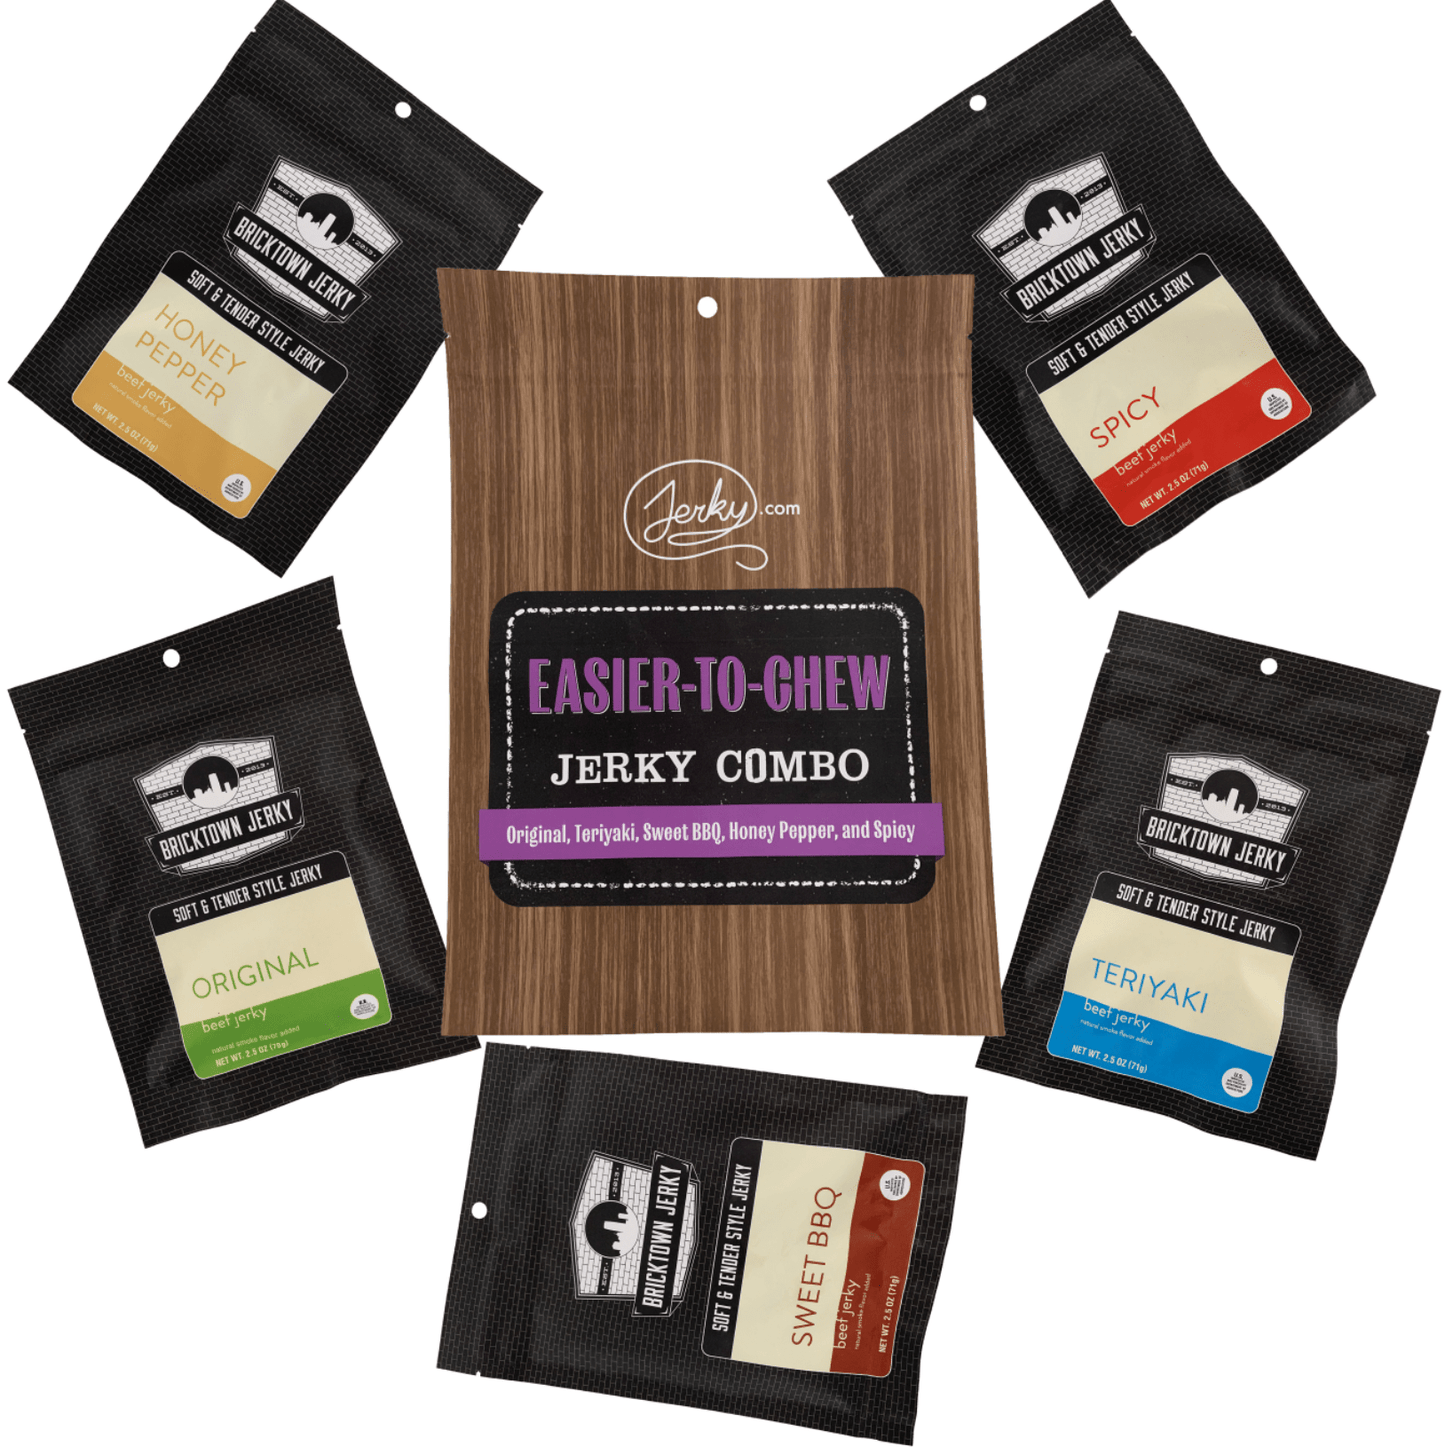 Easier-to-Chew Jerky Combo by Jerky.com